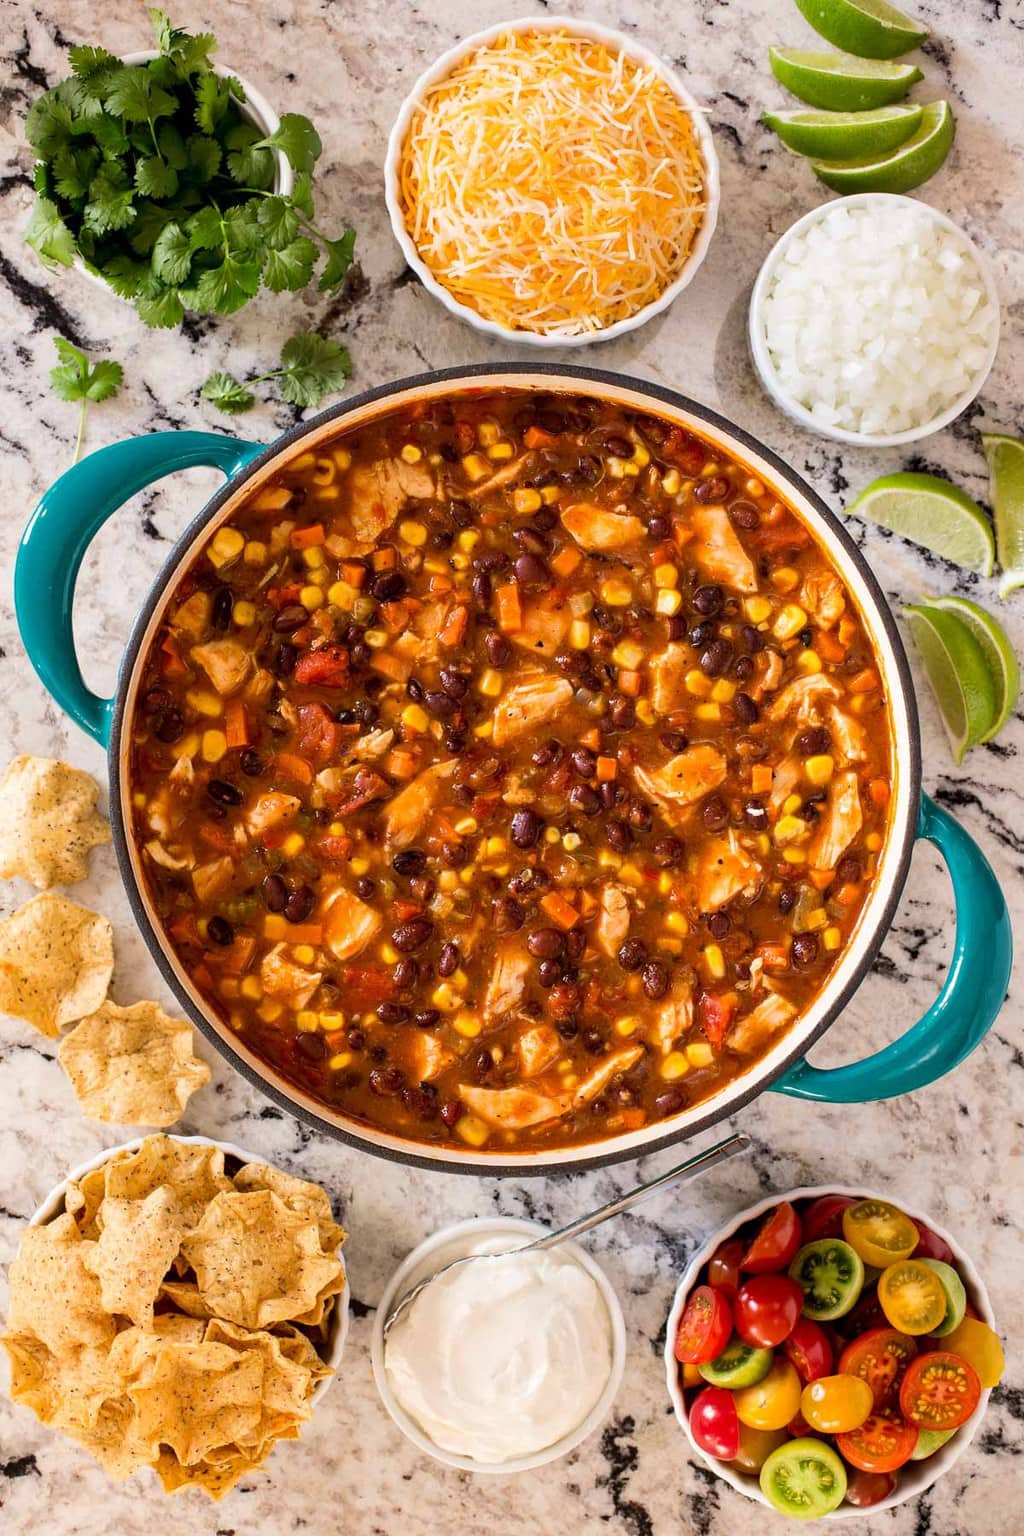 Overhead vertical photo of Chicken Black Bean Chili in a turquoise dutch oven with small bowls of toppings and garnishes.